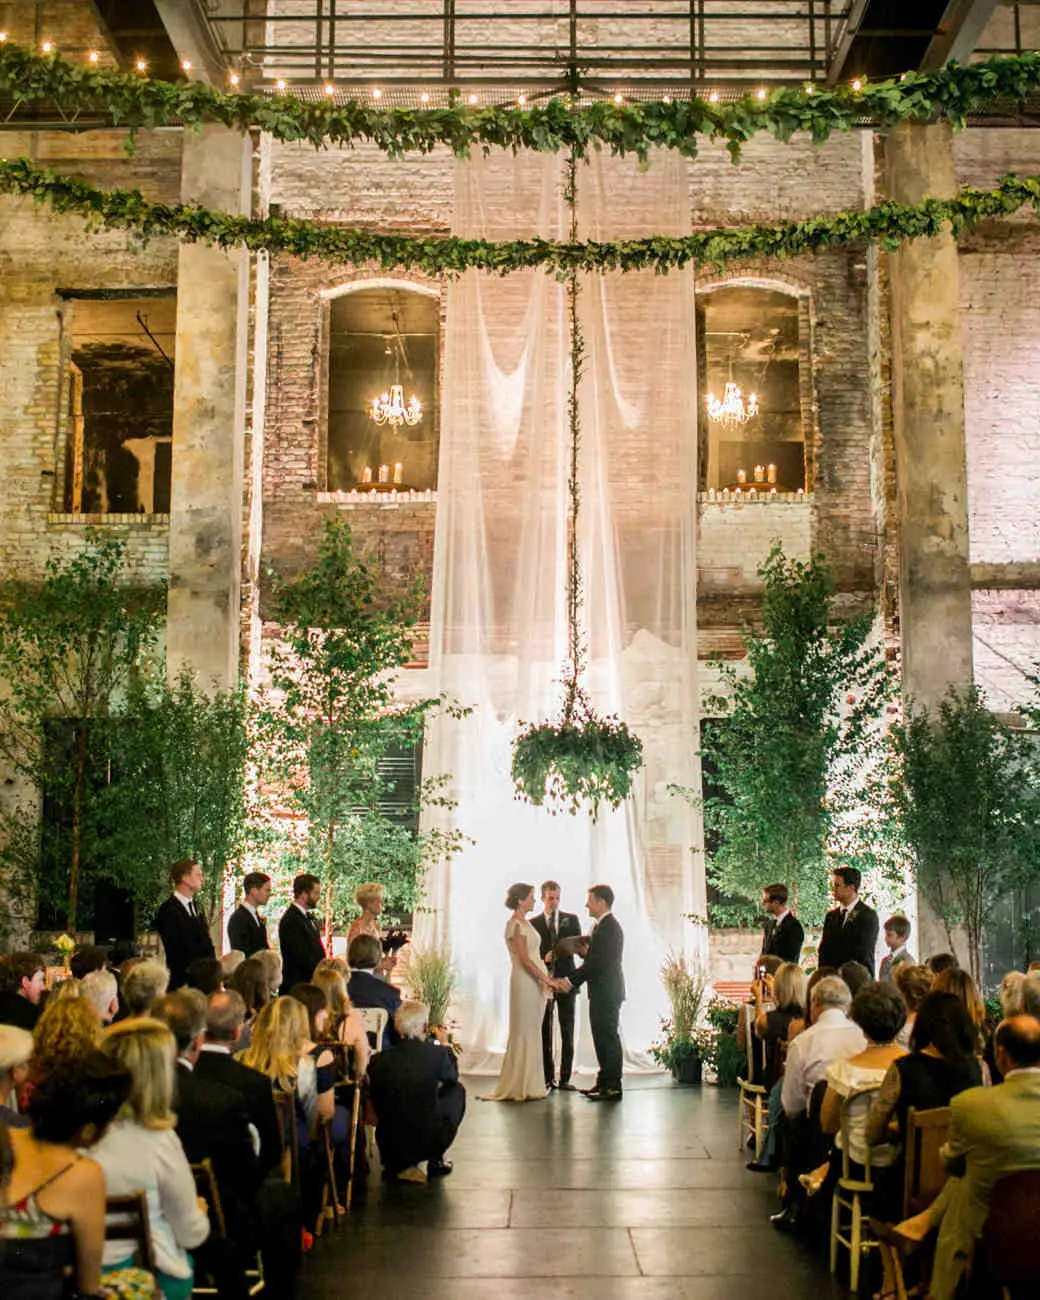 Restored Warehouses Where You Can Tie the Knot